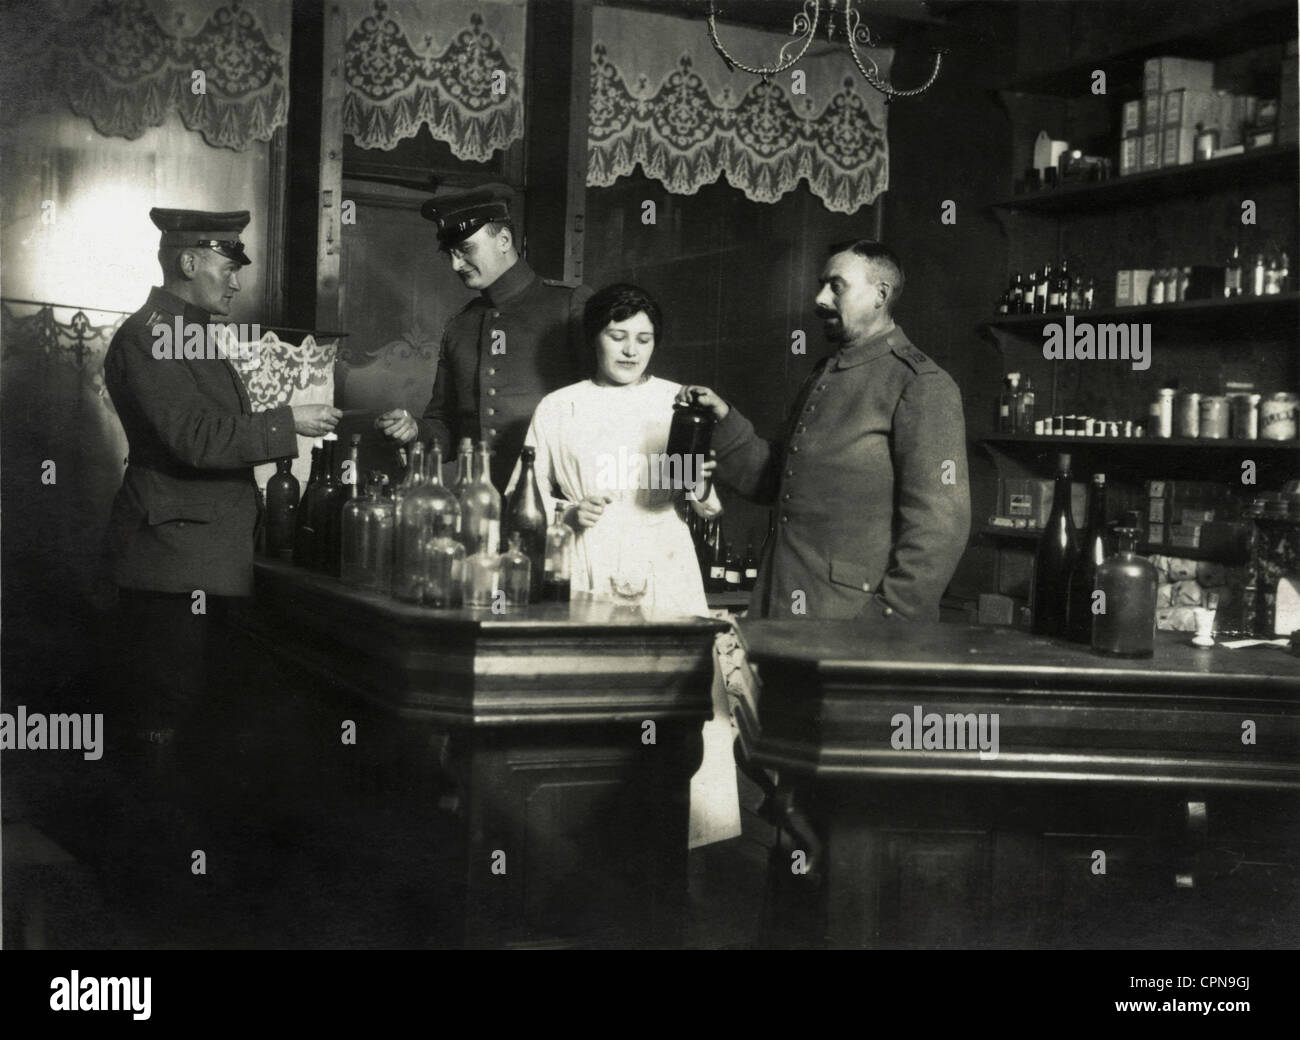 events, First World War / WWI, Germany, German soldiers in a chemist's shop, circa 1915, Additional-Rights-Clearences-Not Available Stock Photo